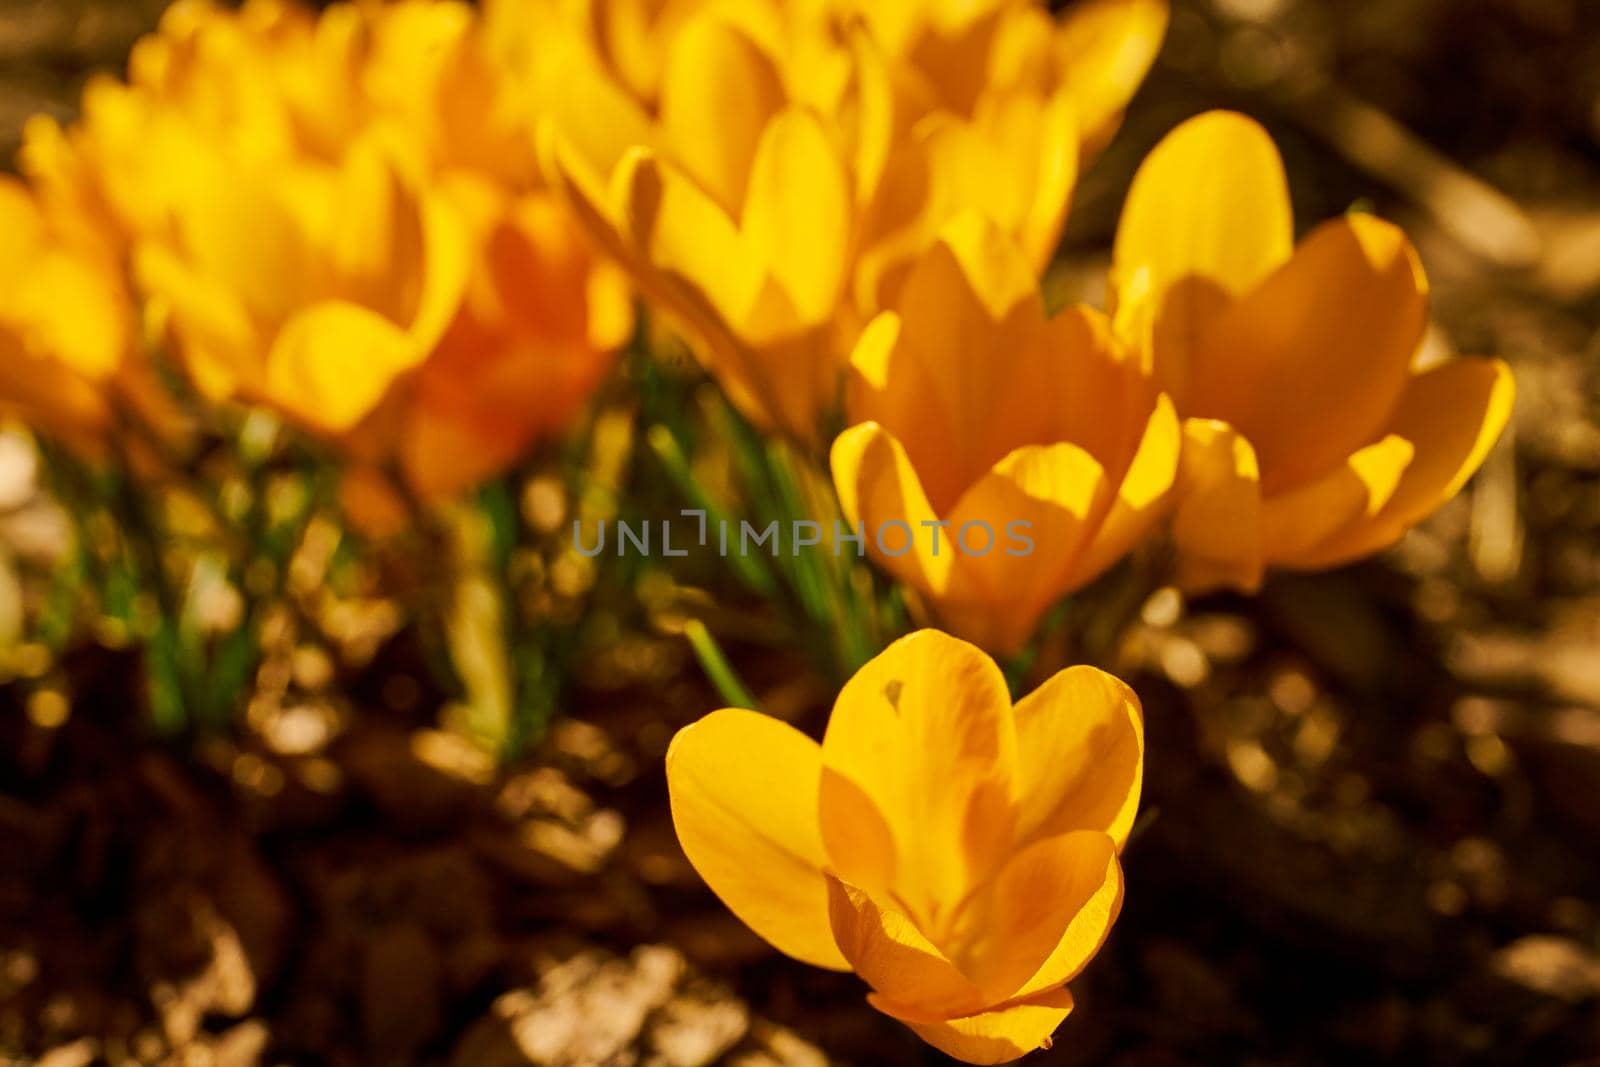 Close up of blooming crocus flowers by Jindrich_Blecha